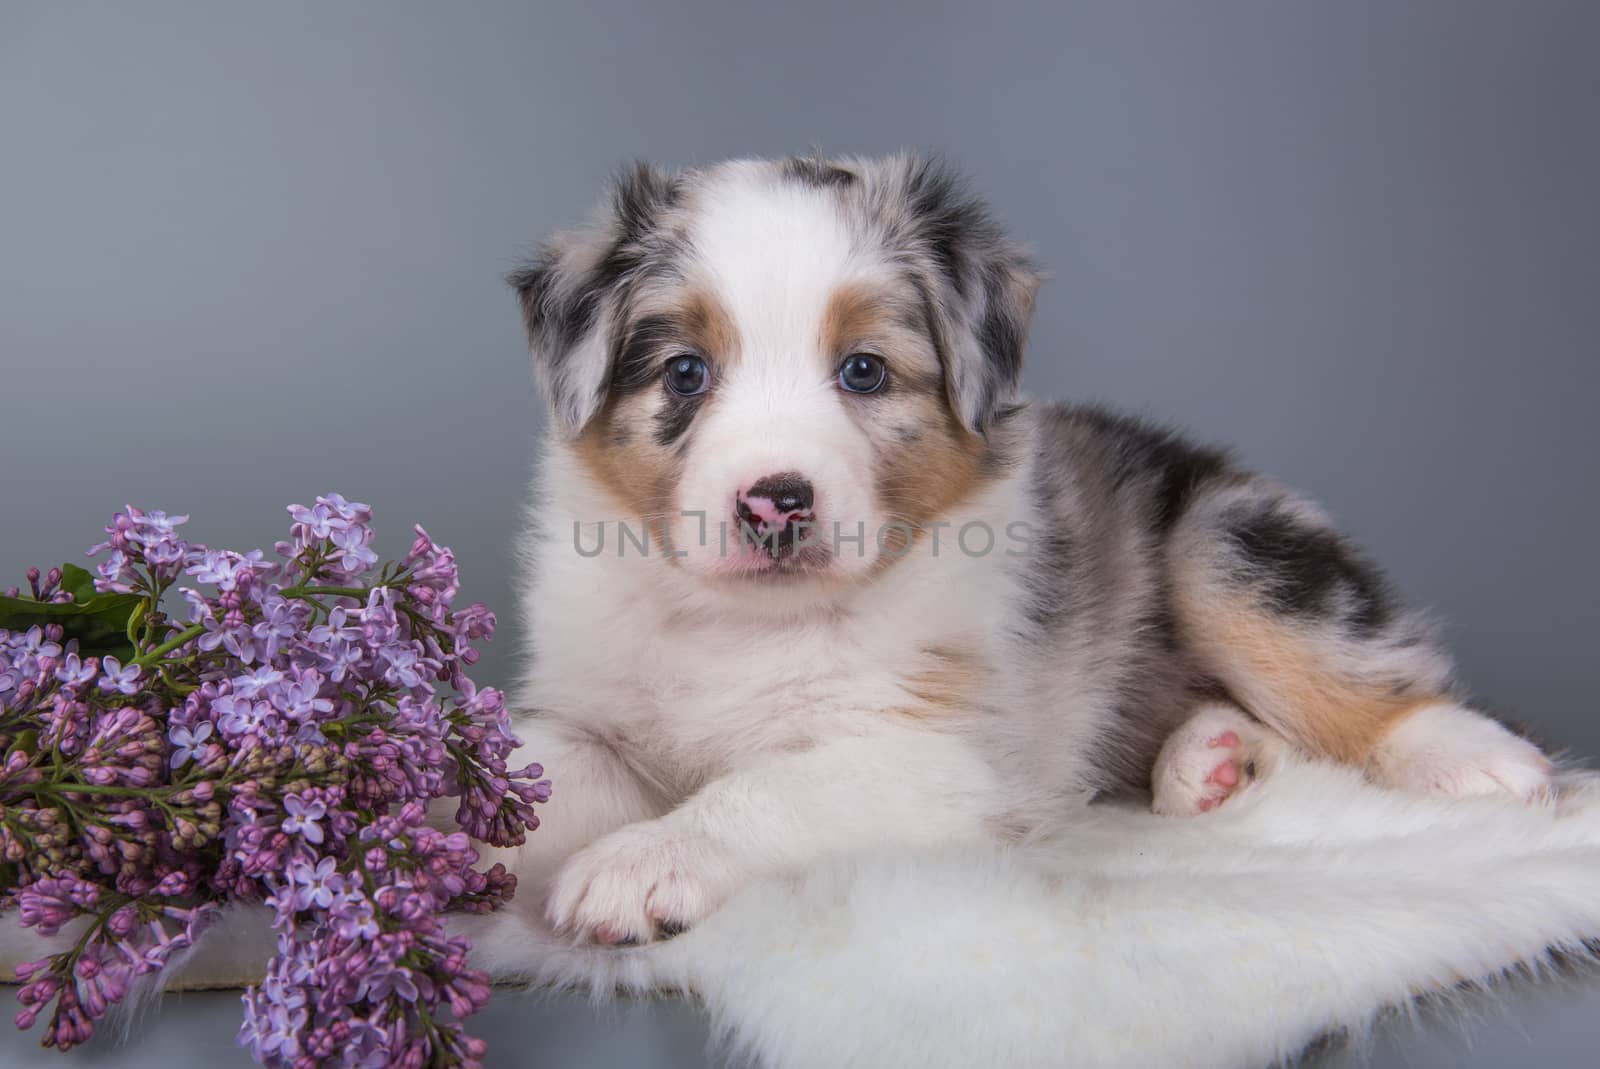 Red Merle Australian Shepherd puppy dog portrait with copper points, six weeks old, sitting with lilac flowers in front of light gray background.